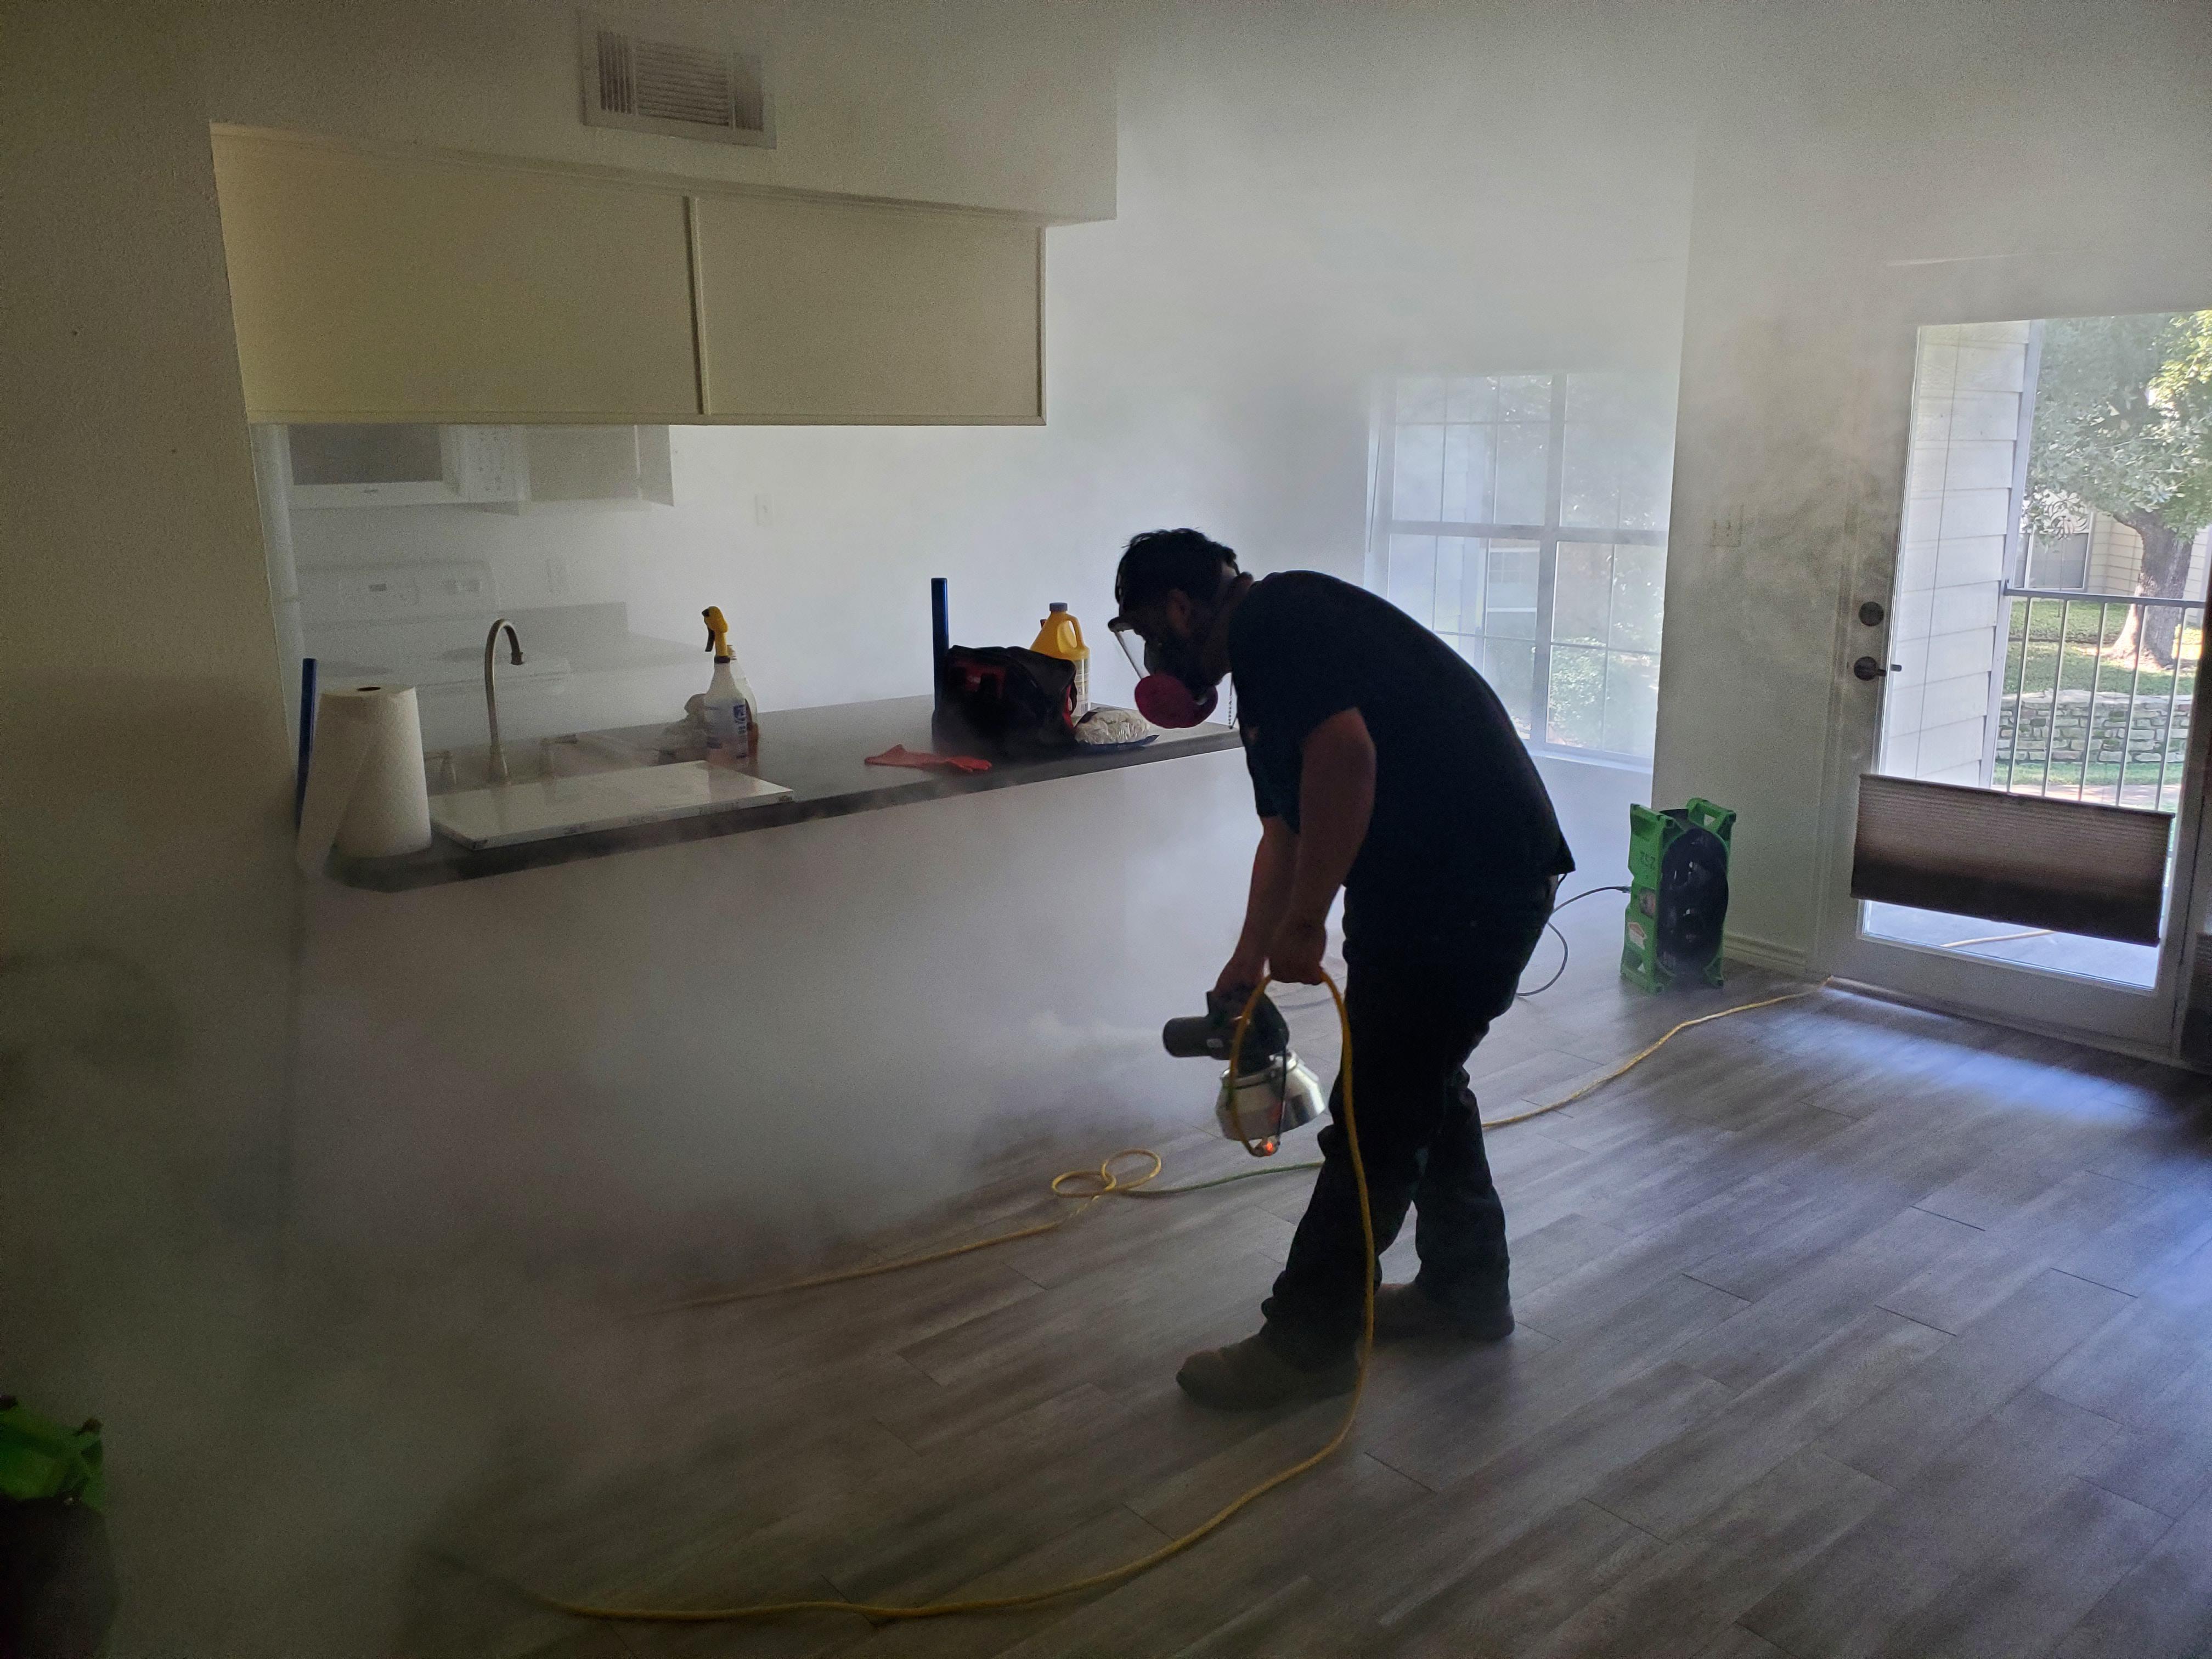 Thermal Fogging a Condominium Unit to Assist with Smoke Odor